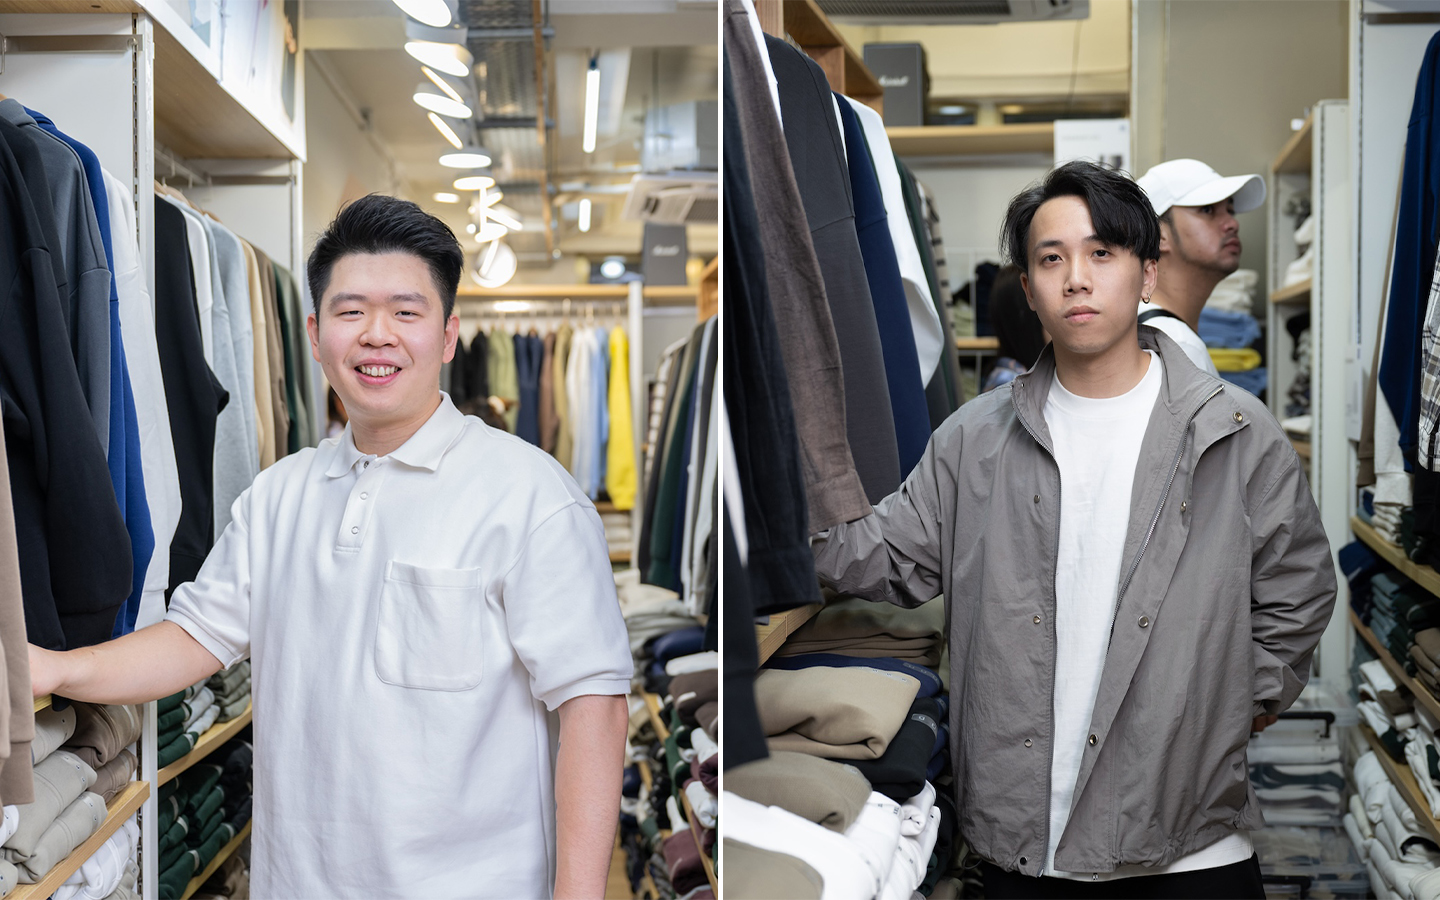 Founded by Ryan Wong (left) and Jack Tam, Pure Zone’s aesthetics is characterised by comfortable, logo-free, monochromatic essentials